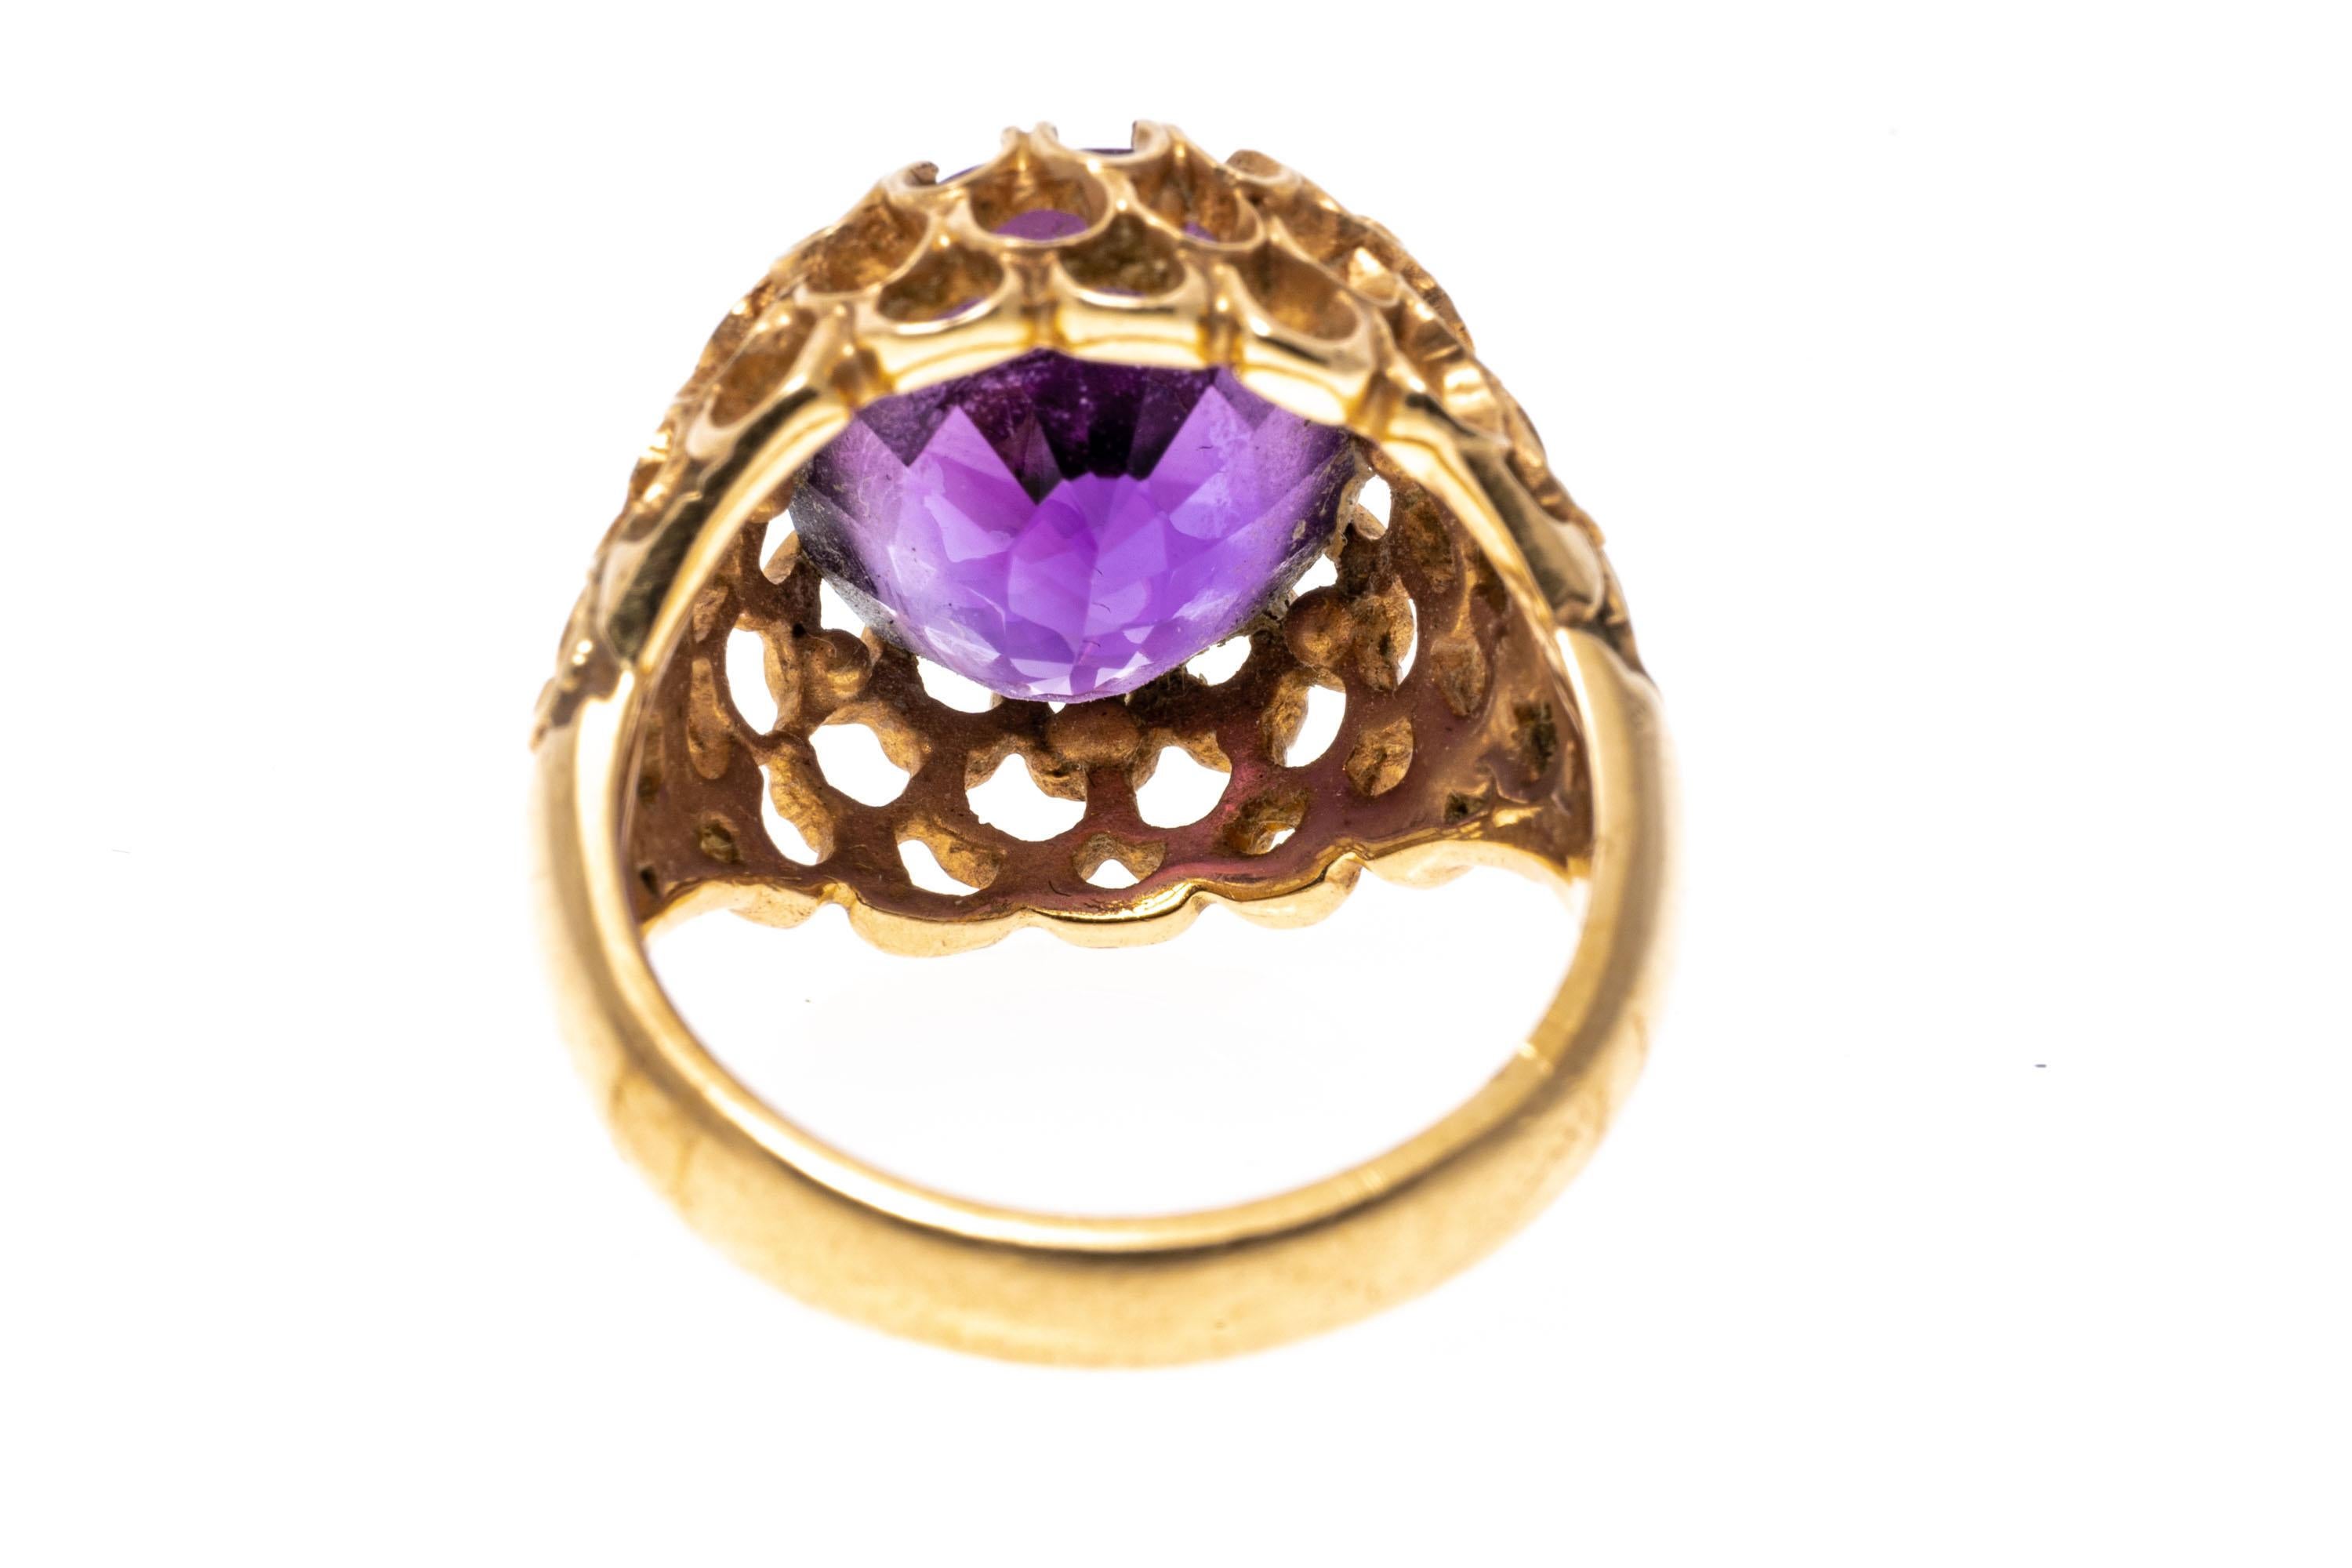 14k yellow gold ring. This wonderful ring has an oval faceted, medium to dark purple color amethyst, approximately 6.84 CTS and set into a wide, concentric open scalloped motif mounting.
Marks: 14k
Dimensions: 7/16